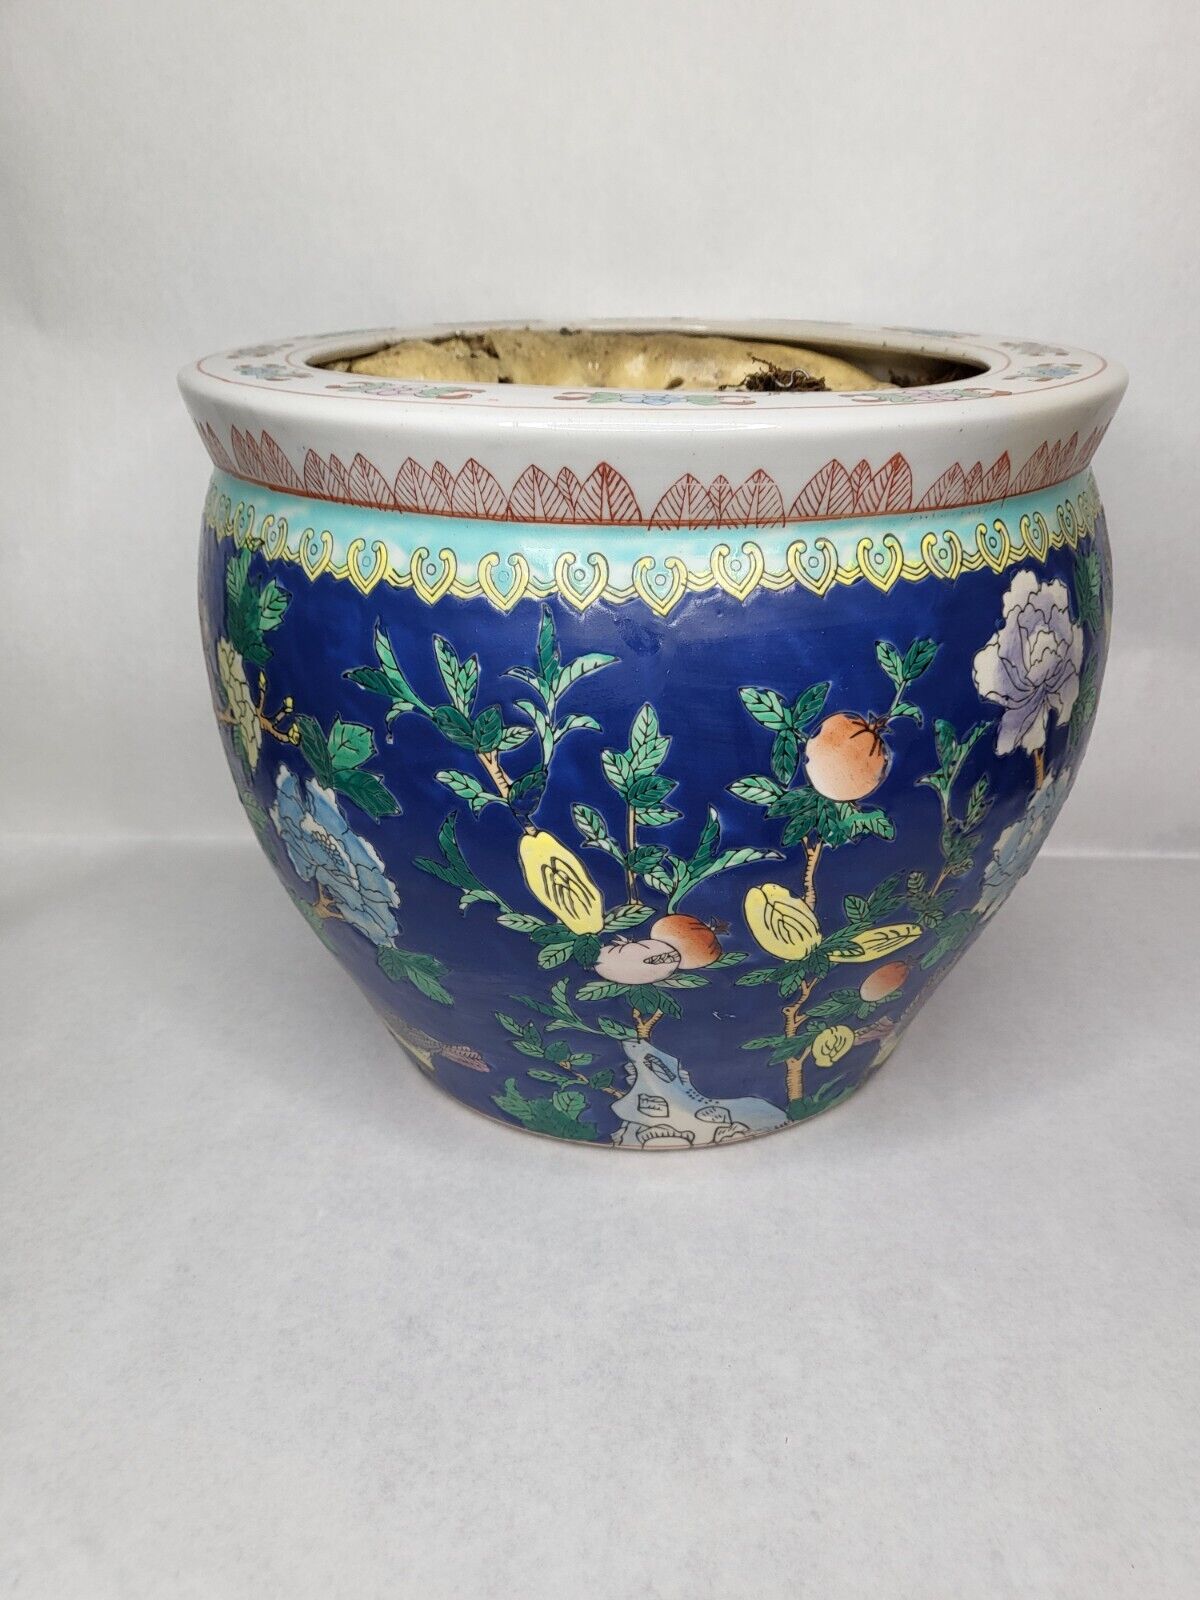 Vintage Chinese Koi Fish Porcelain Jardiniere Blue with Floral Fish Bowl